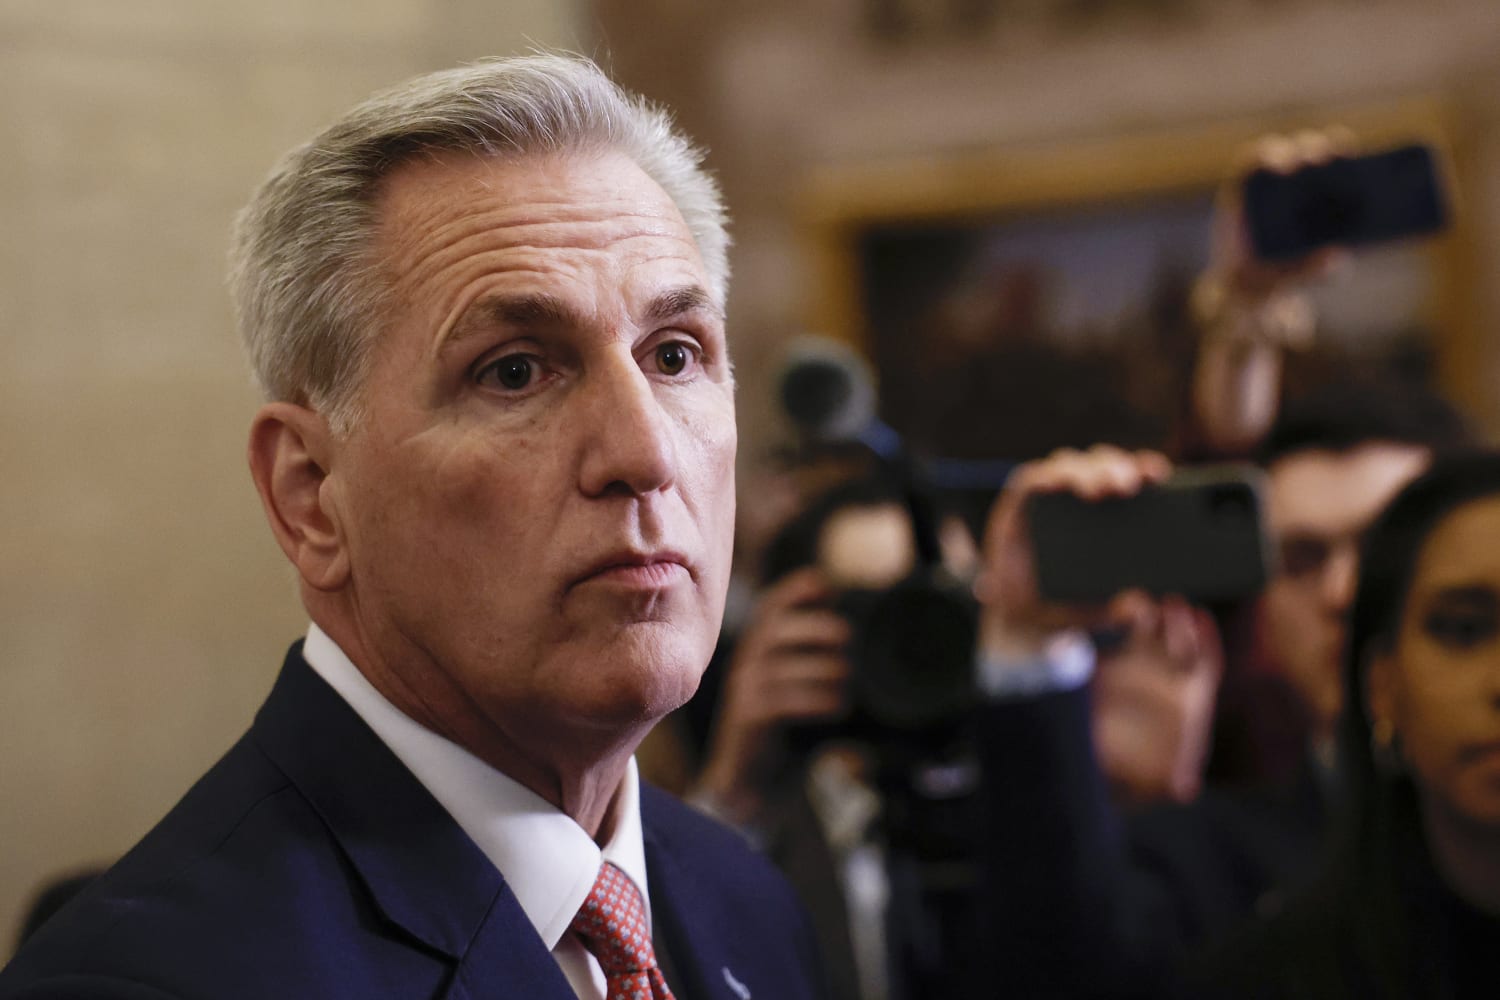 McCarthy says Americans should not protest if Trump is indicted